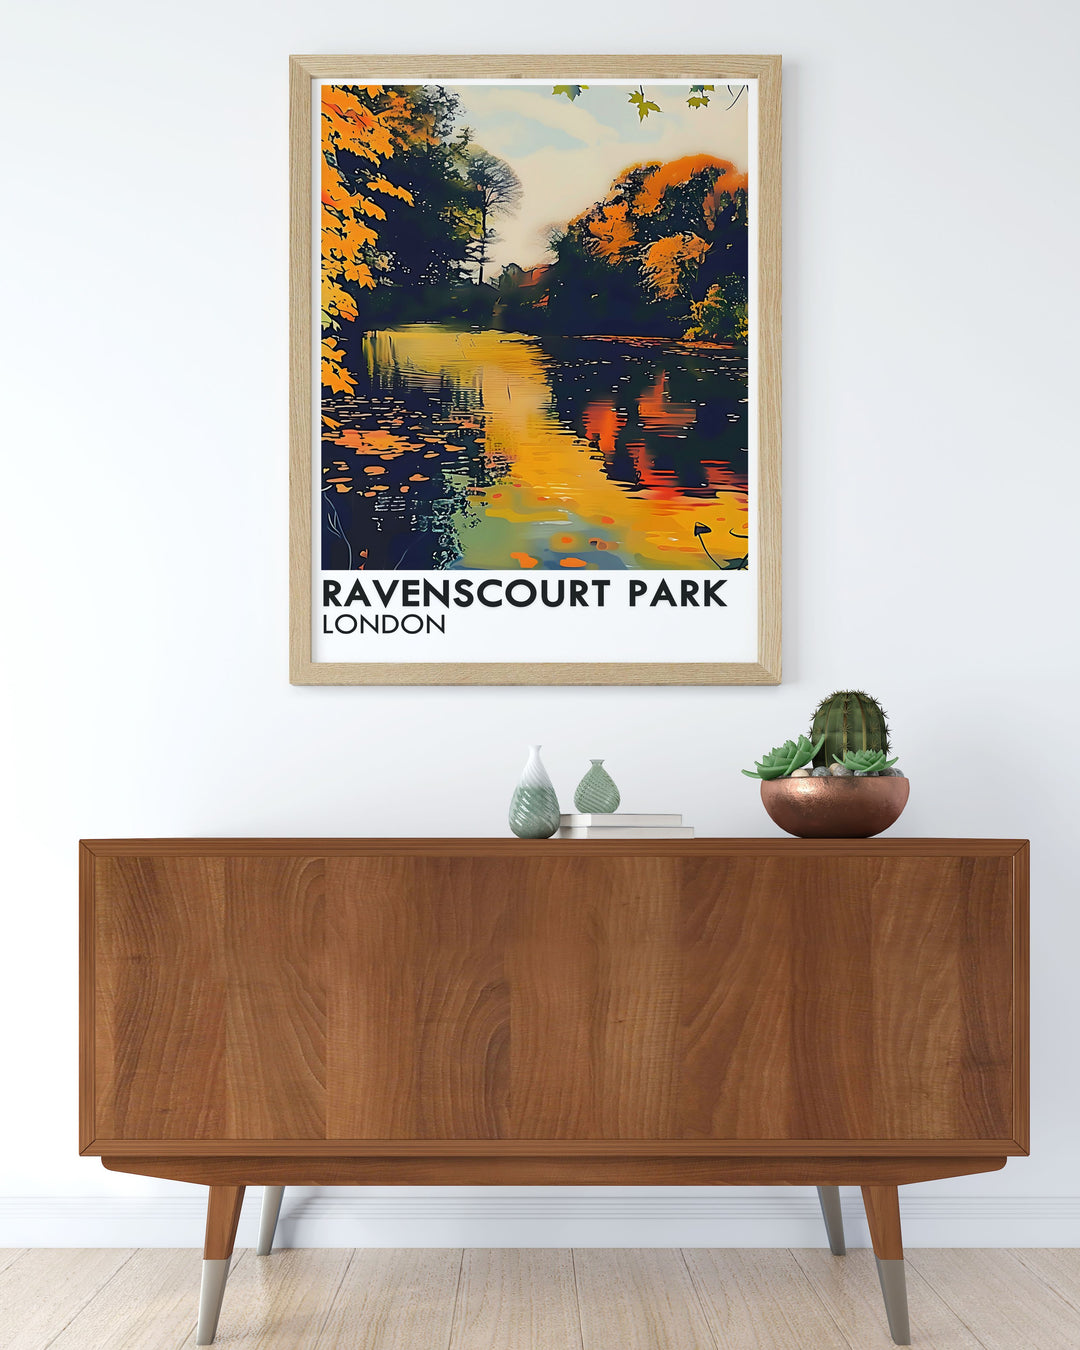 Stunning Ravenscourt Park Lake Wall Art capturing the serene landscape of the lake surrounded by greenery and historic plane trees. This print adds a touch of elegance and calmness to your living space.